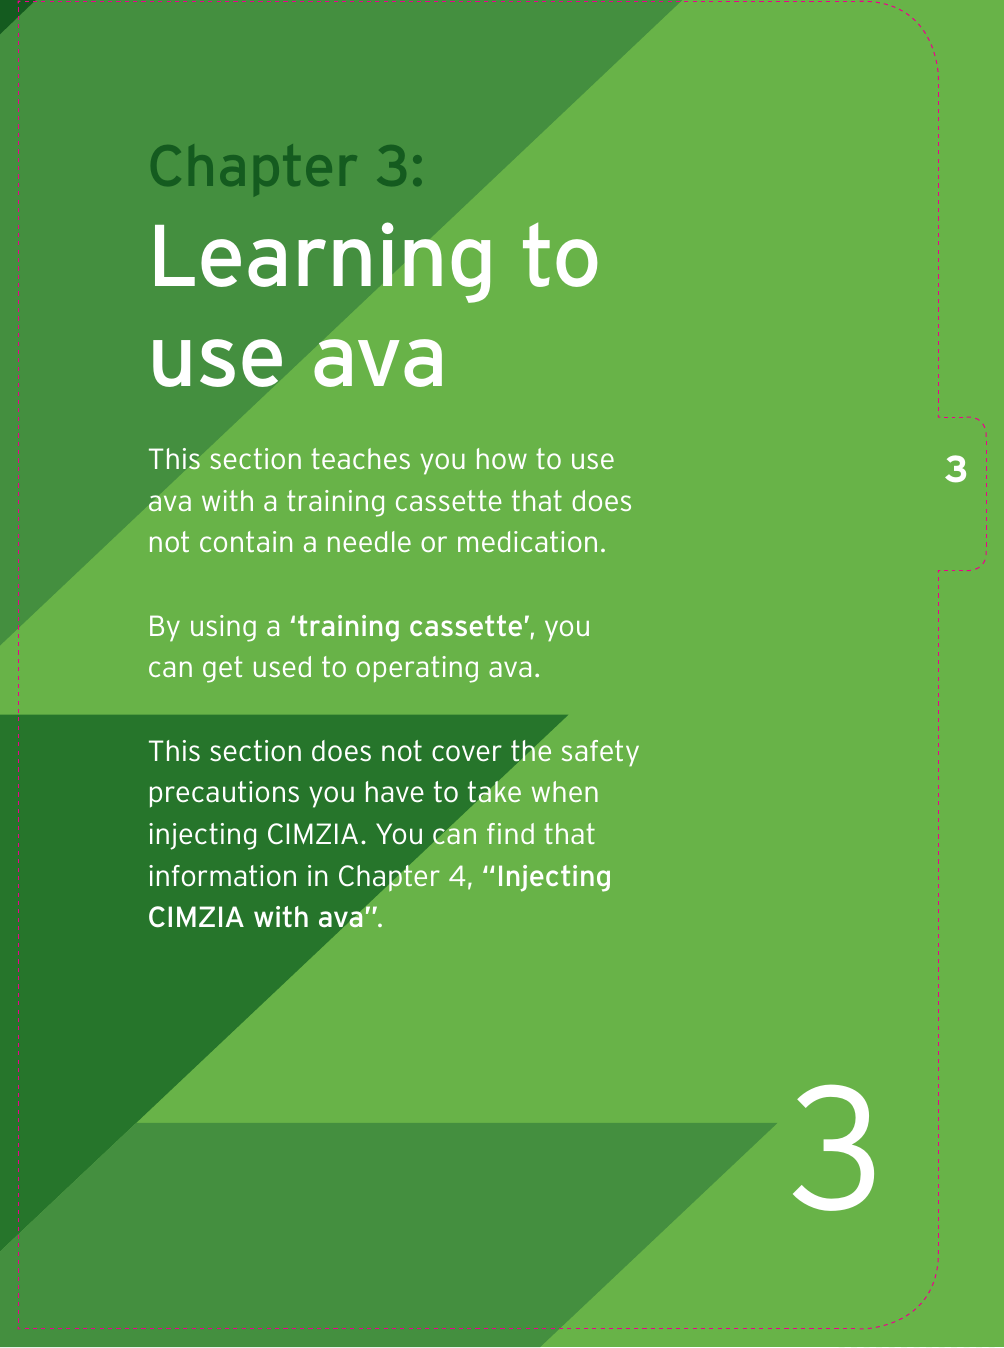 3Chapter 3: Learning to use avaThis section teaches you how to use ava with a training cassette that does not contain a needle or medication.By using a ‘training cassette’, you can get used to operating ava. This section does not cover the safety precautions you have to take when injecting CIMZIA. You can ﬁ nd that information in Chapter 4, “Injecting CIMZIA with ava”.3